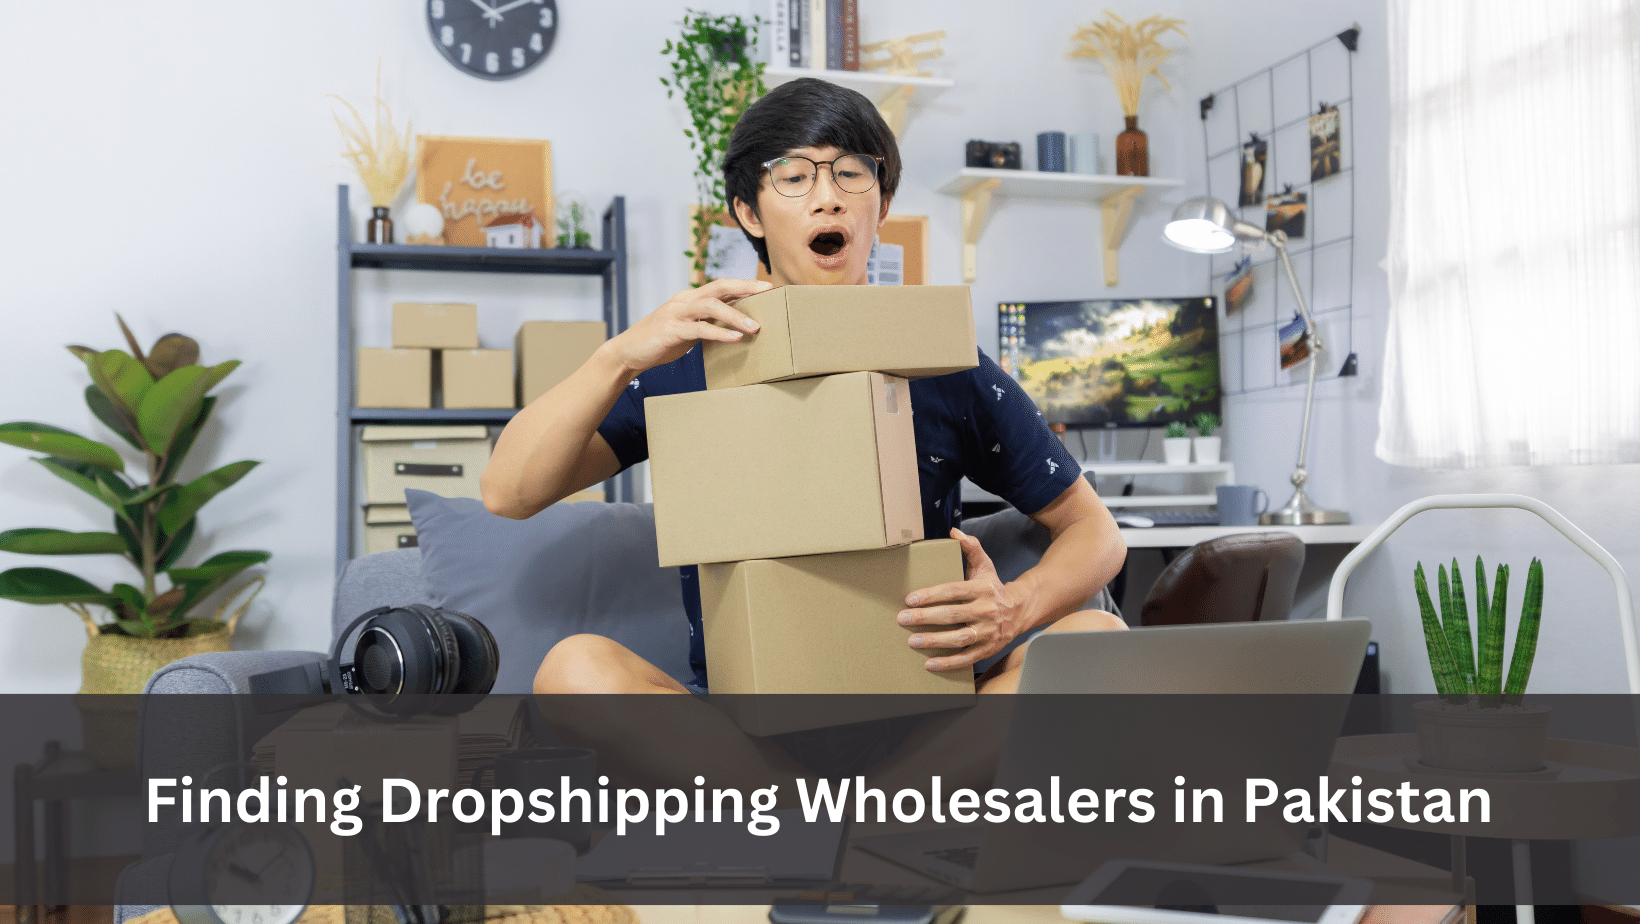 FINDING TRUSTWORTHY DROPSHIPPING WHOLESALERS IN PAKISTAN